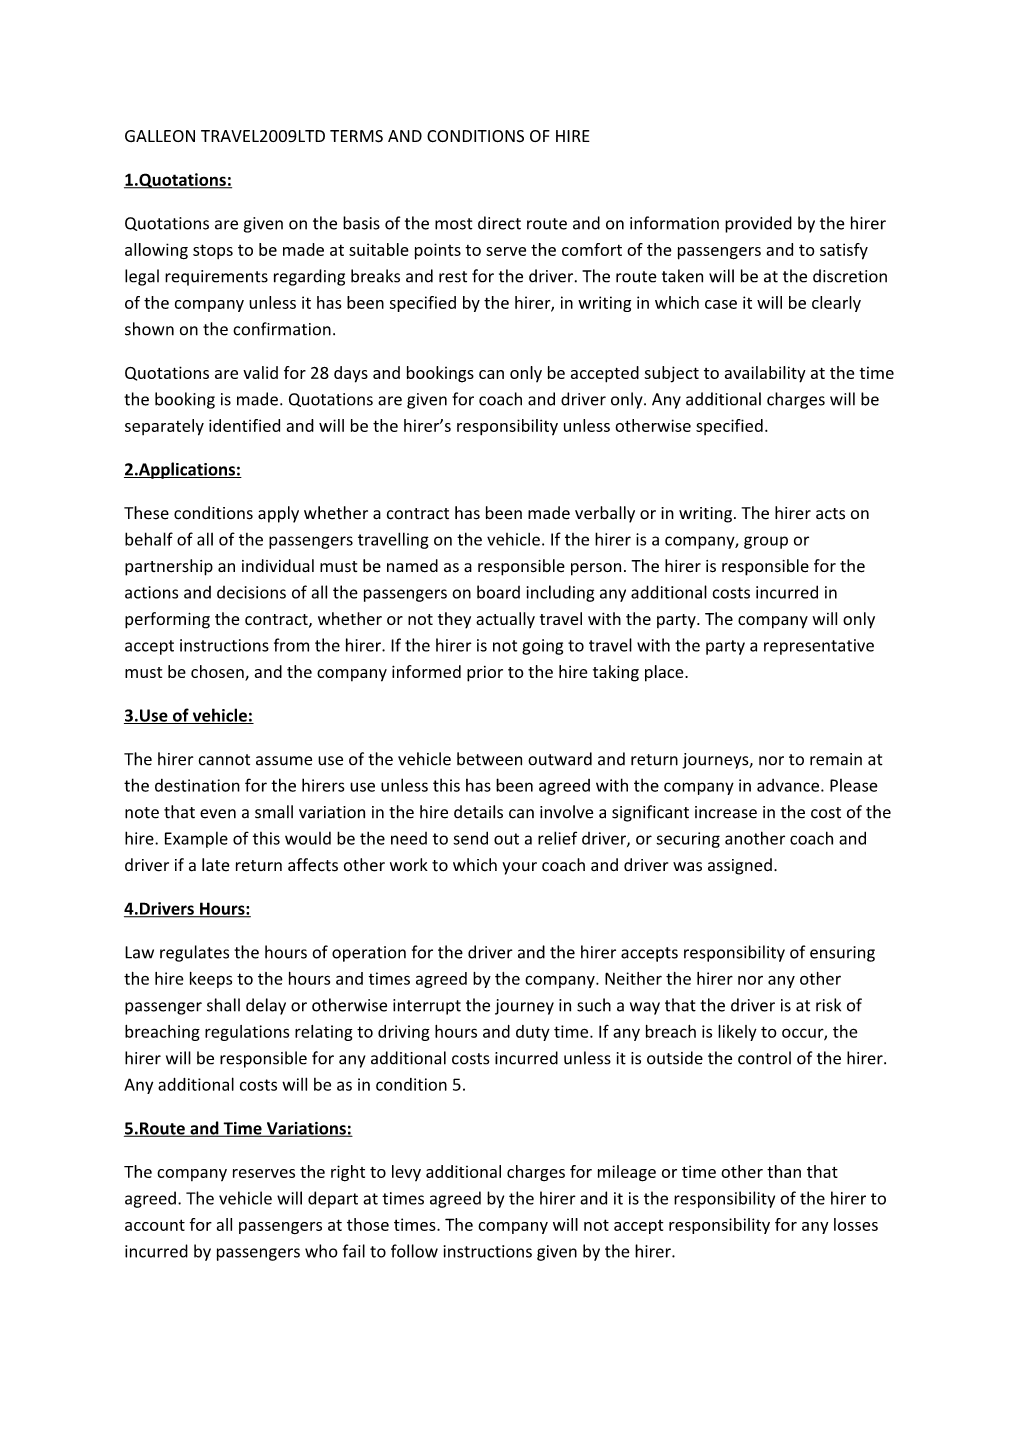 Galleon Travel2009ltd Terms and Conditions of Hire